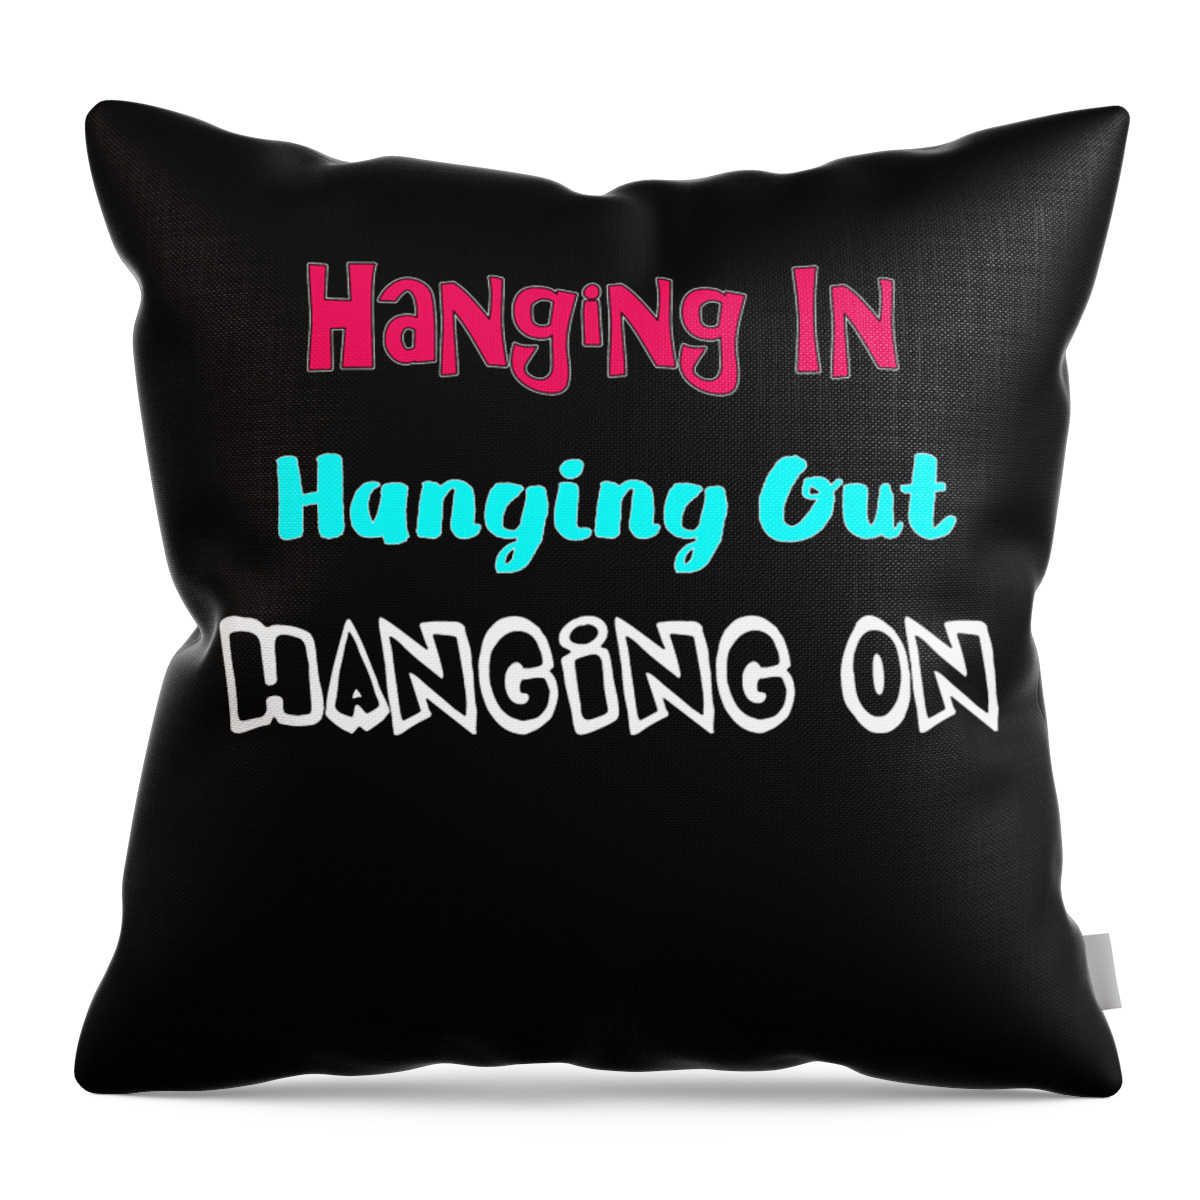 Hanging In Throw Pillow featuring the digital art Hanging in Hanging Out Hanging On by Judy Hall-Folde